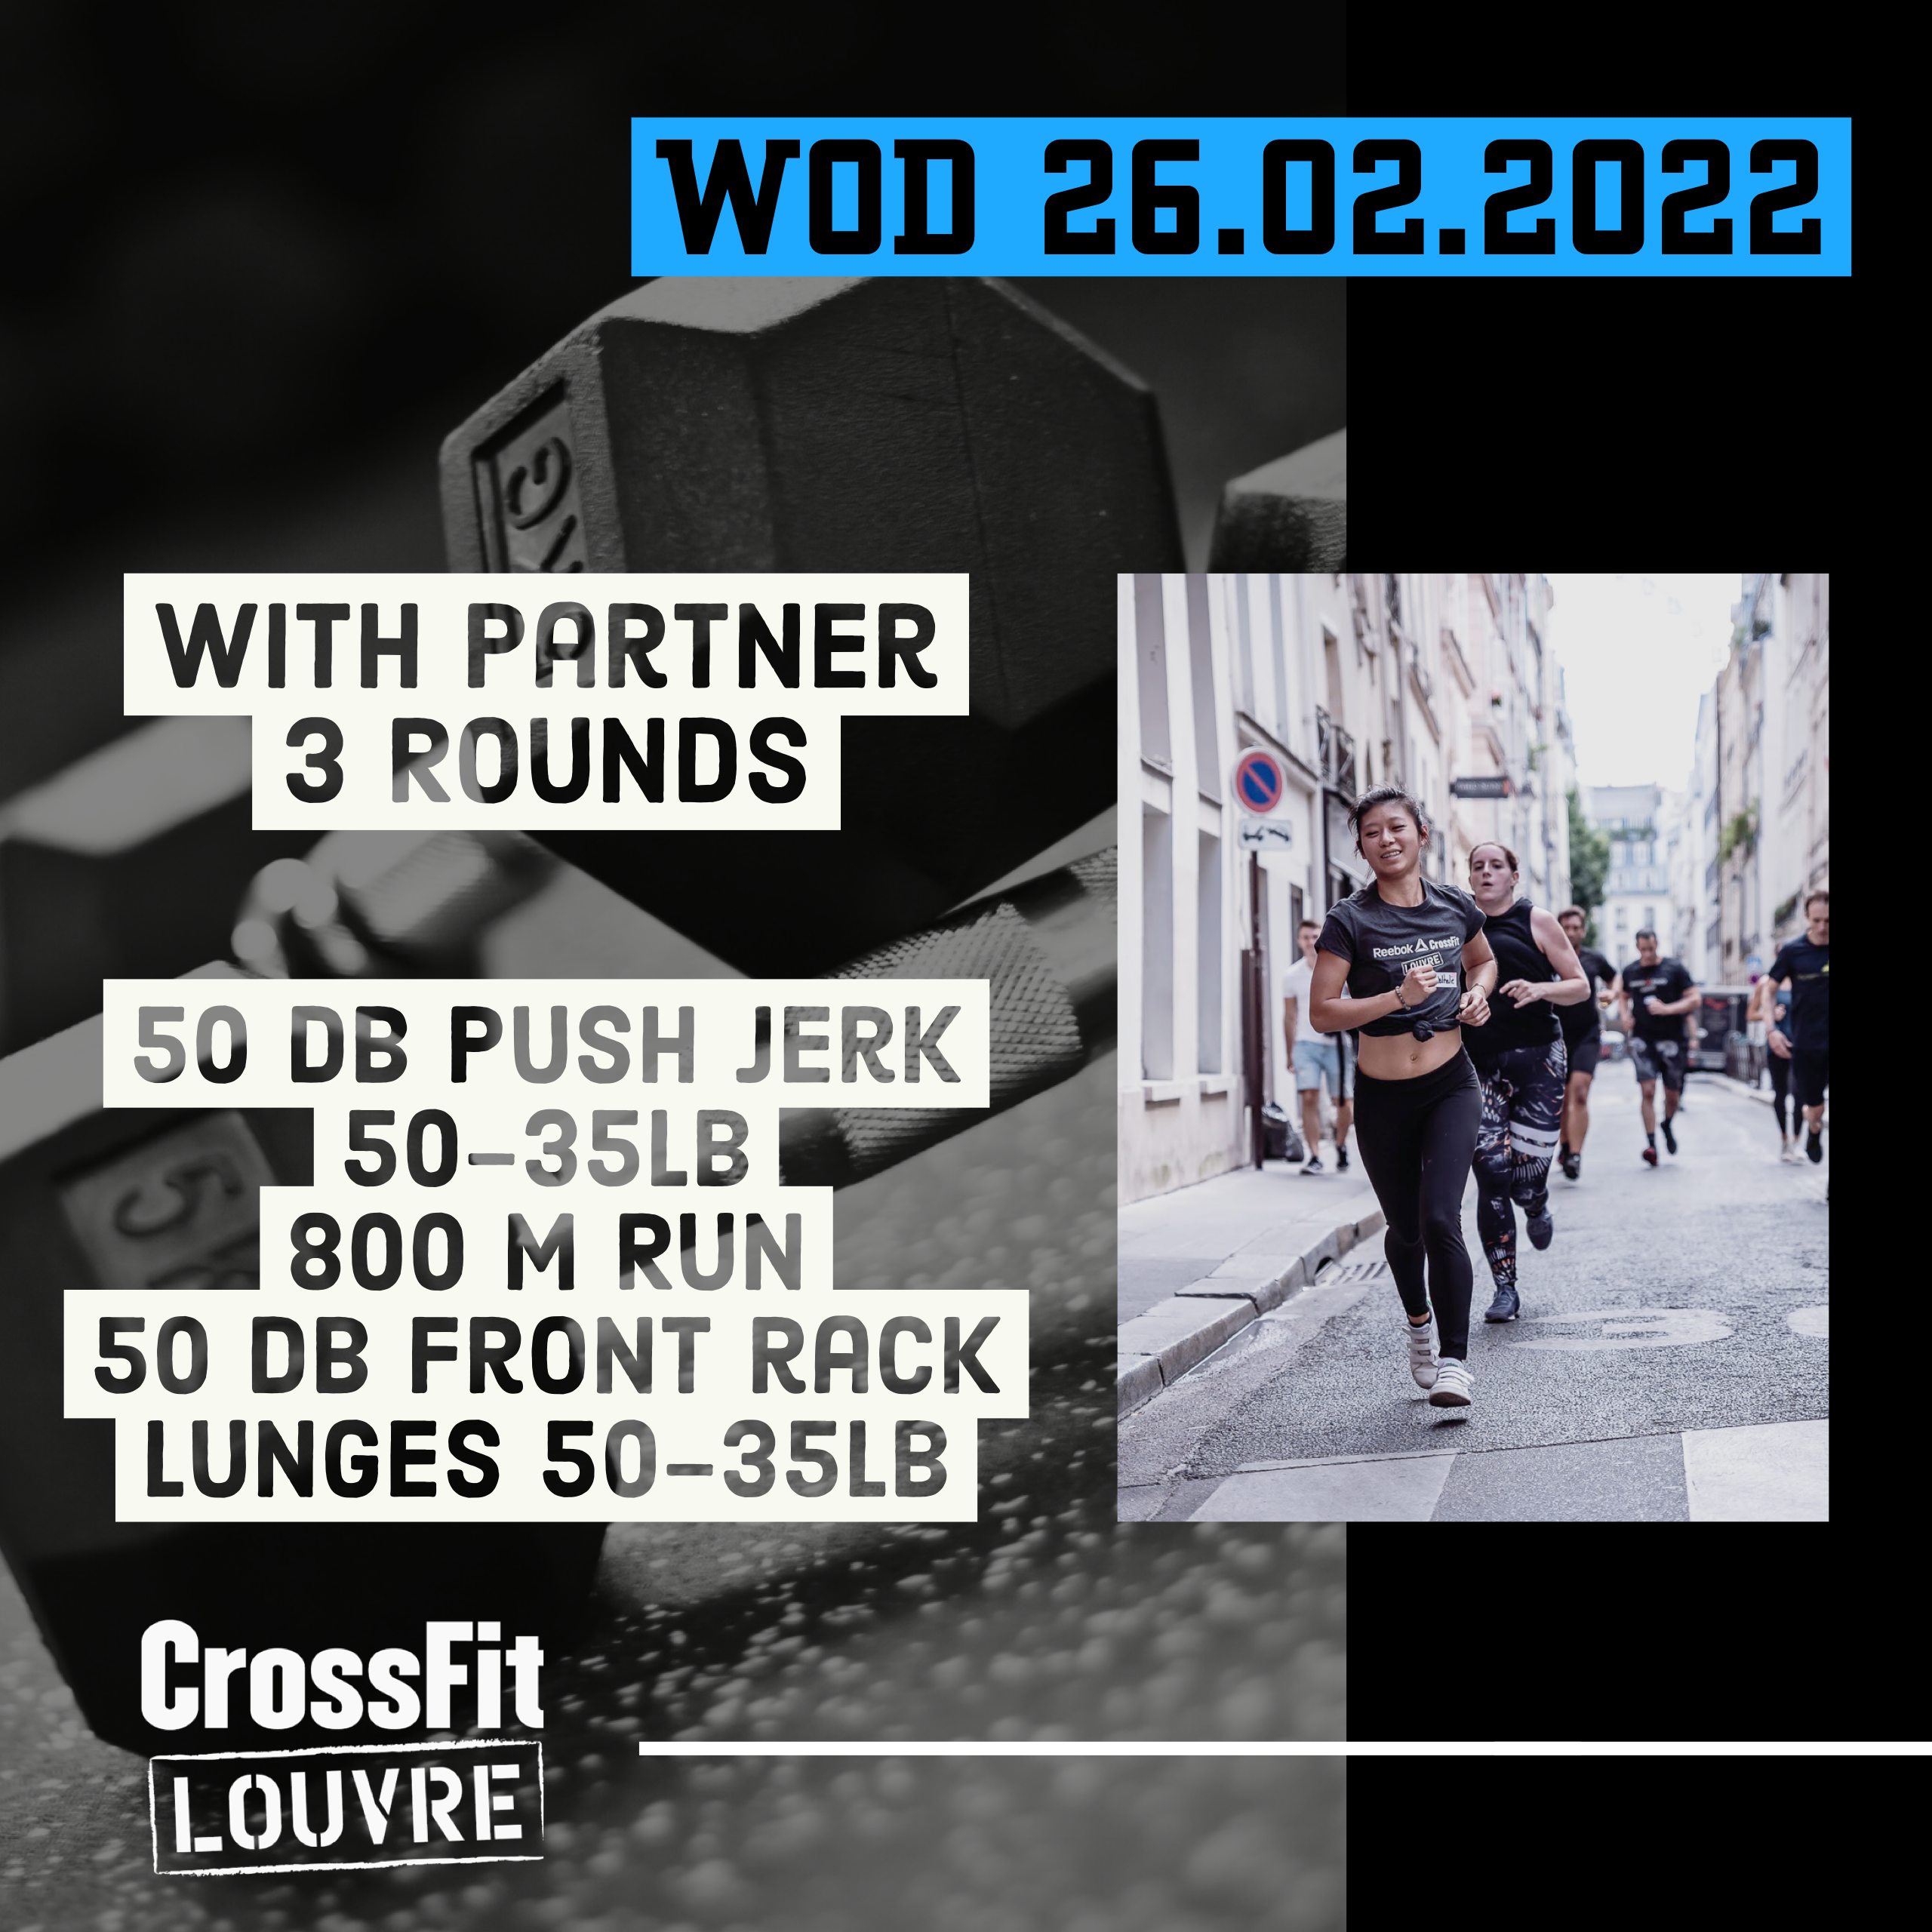 For Time DB Push Jerk Run DB Front Rack Lunges Triplet With Partner